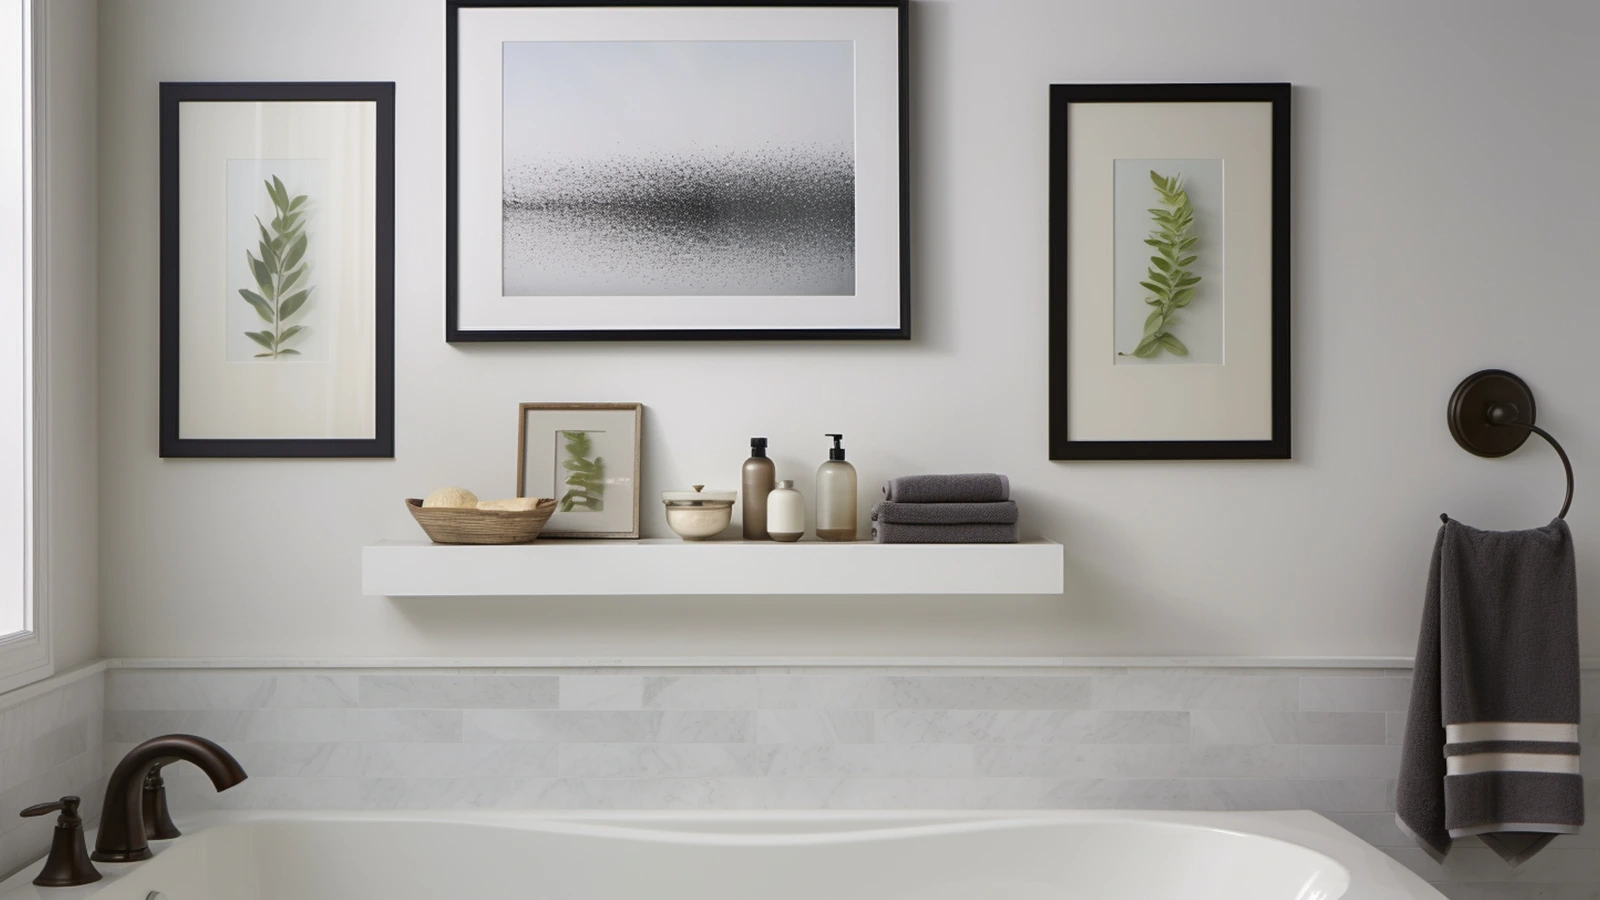 Small bathroom counter decorating ideas: a bathroom with two framed pictures above a bathtub.